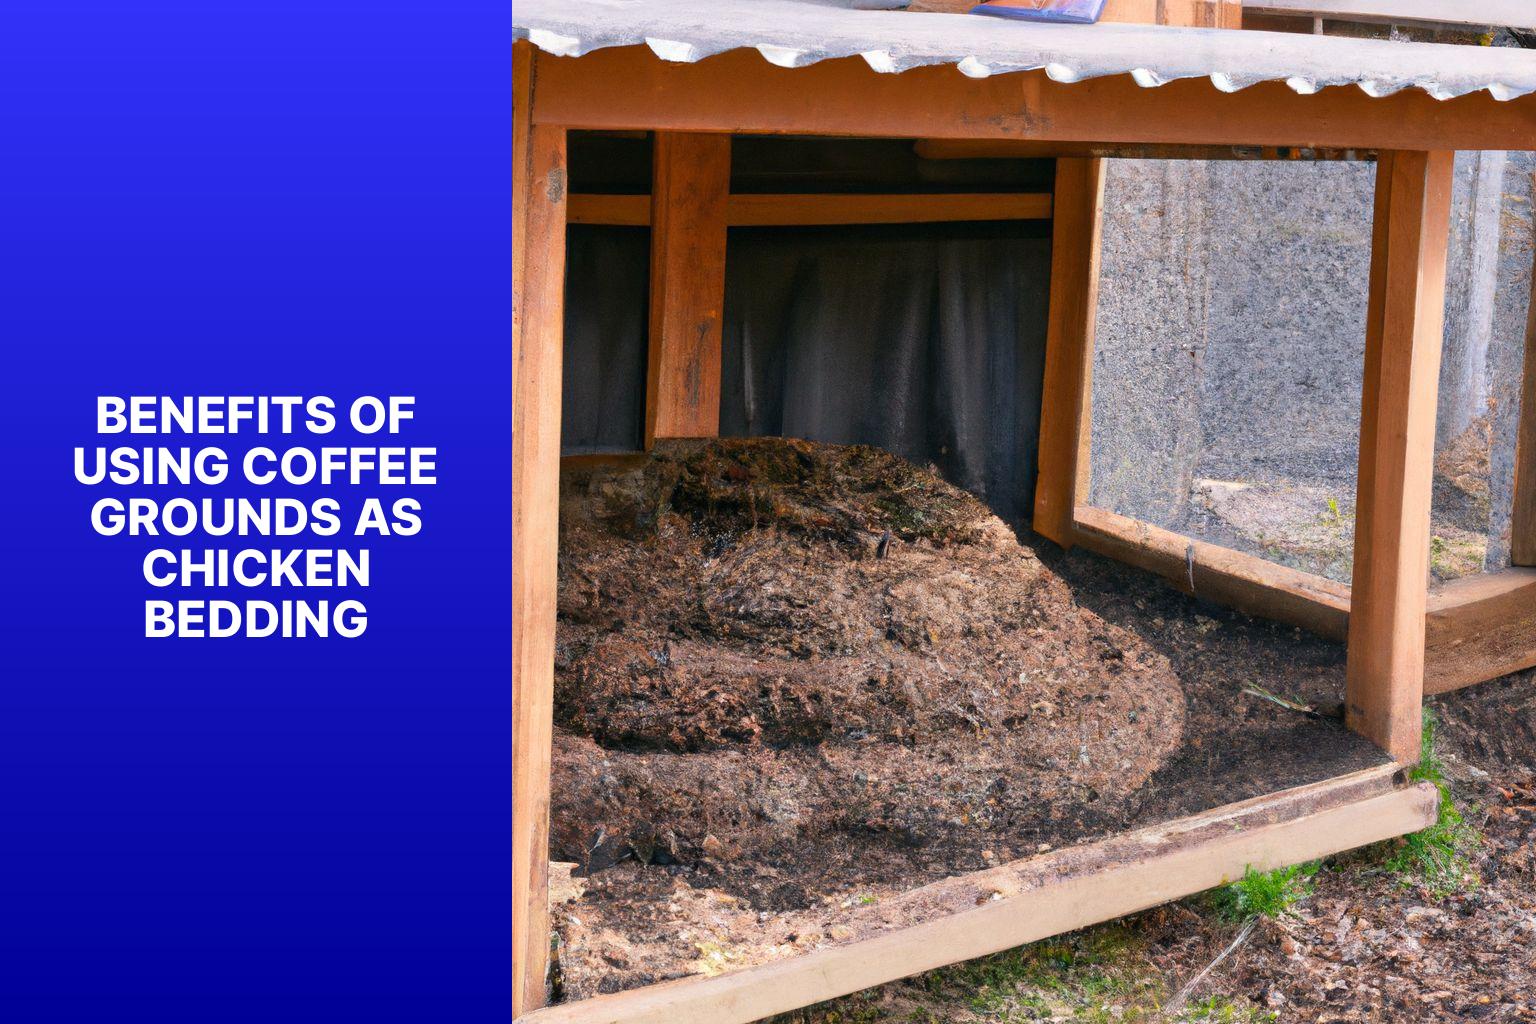 Benefits of Using Coffee Grounds as Chicken Bedding - Coffee Grounds as Chicken Bedding: A Poultry Keeper